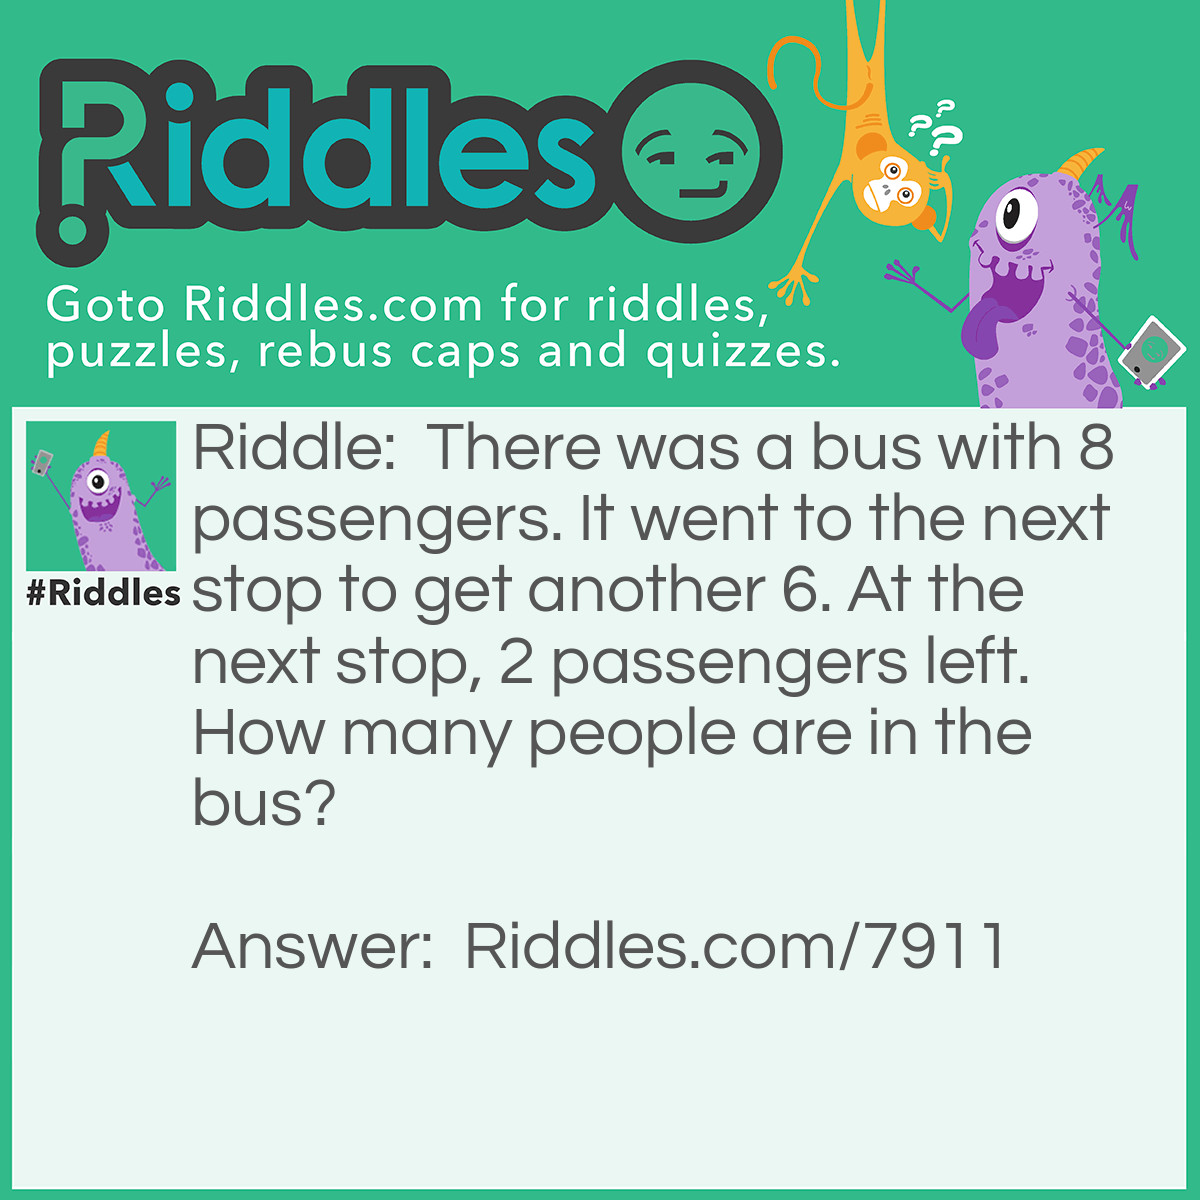 Riddle: There was a bus with 8 passengers. It went to the next stop to get another 6. At the next stop, 2 passengers left. How many people are in the bus? Answer: 13, including the driver.